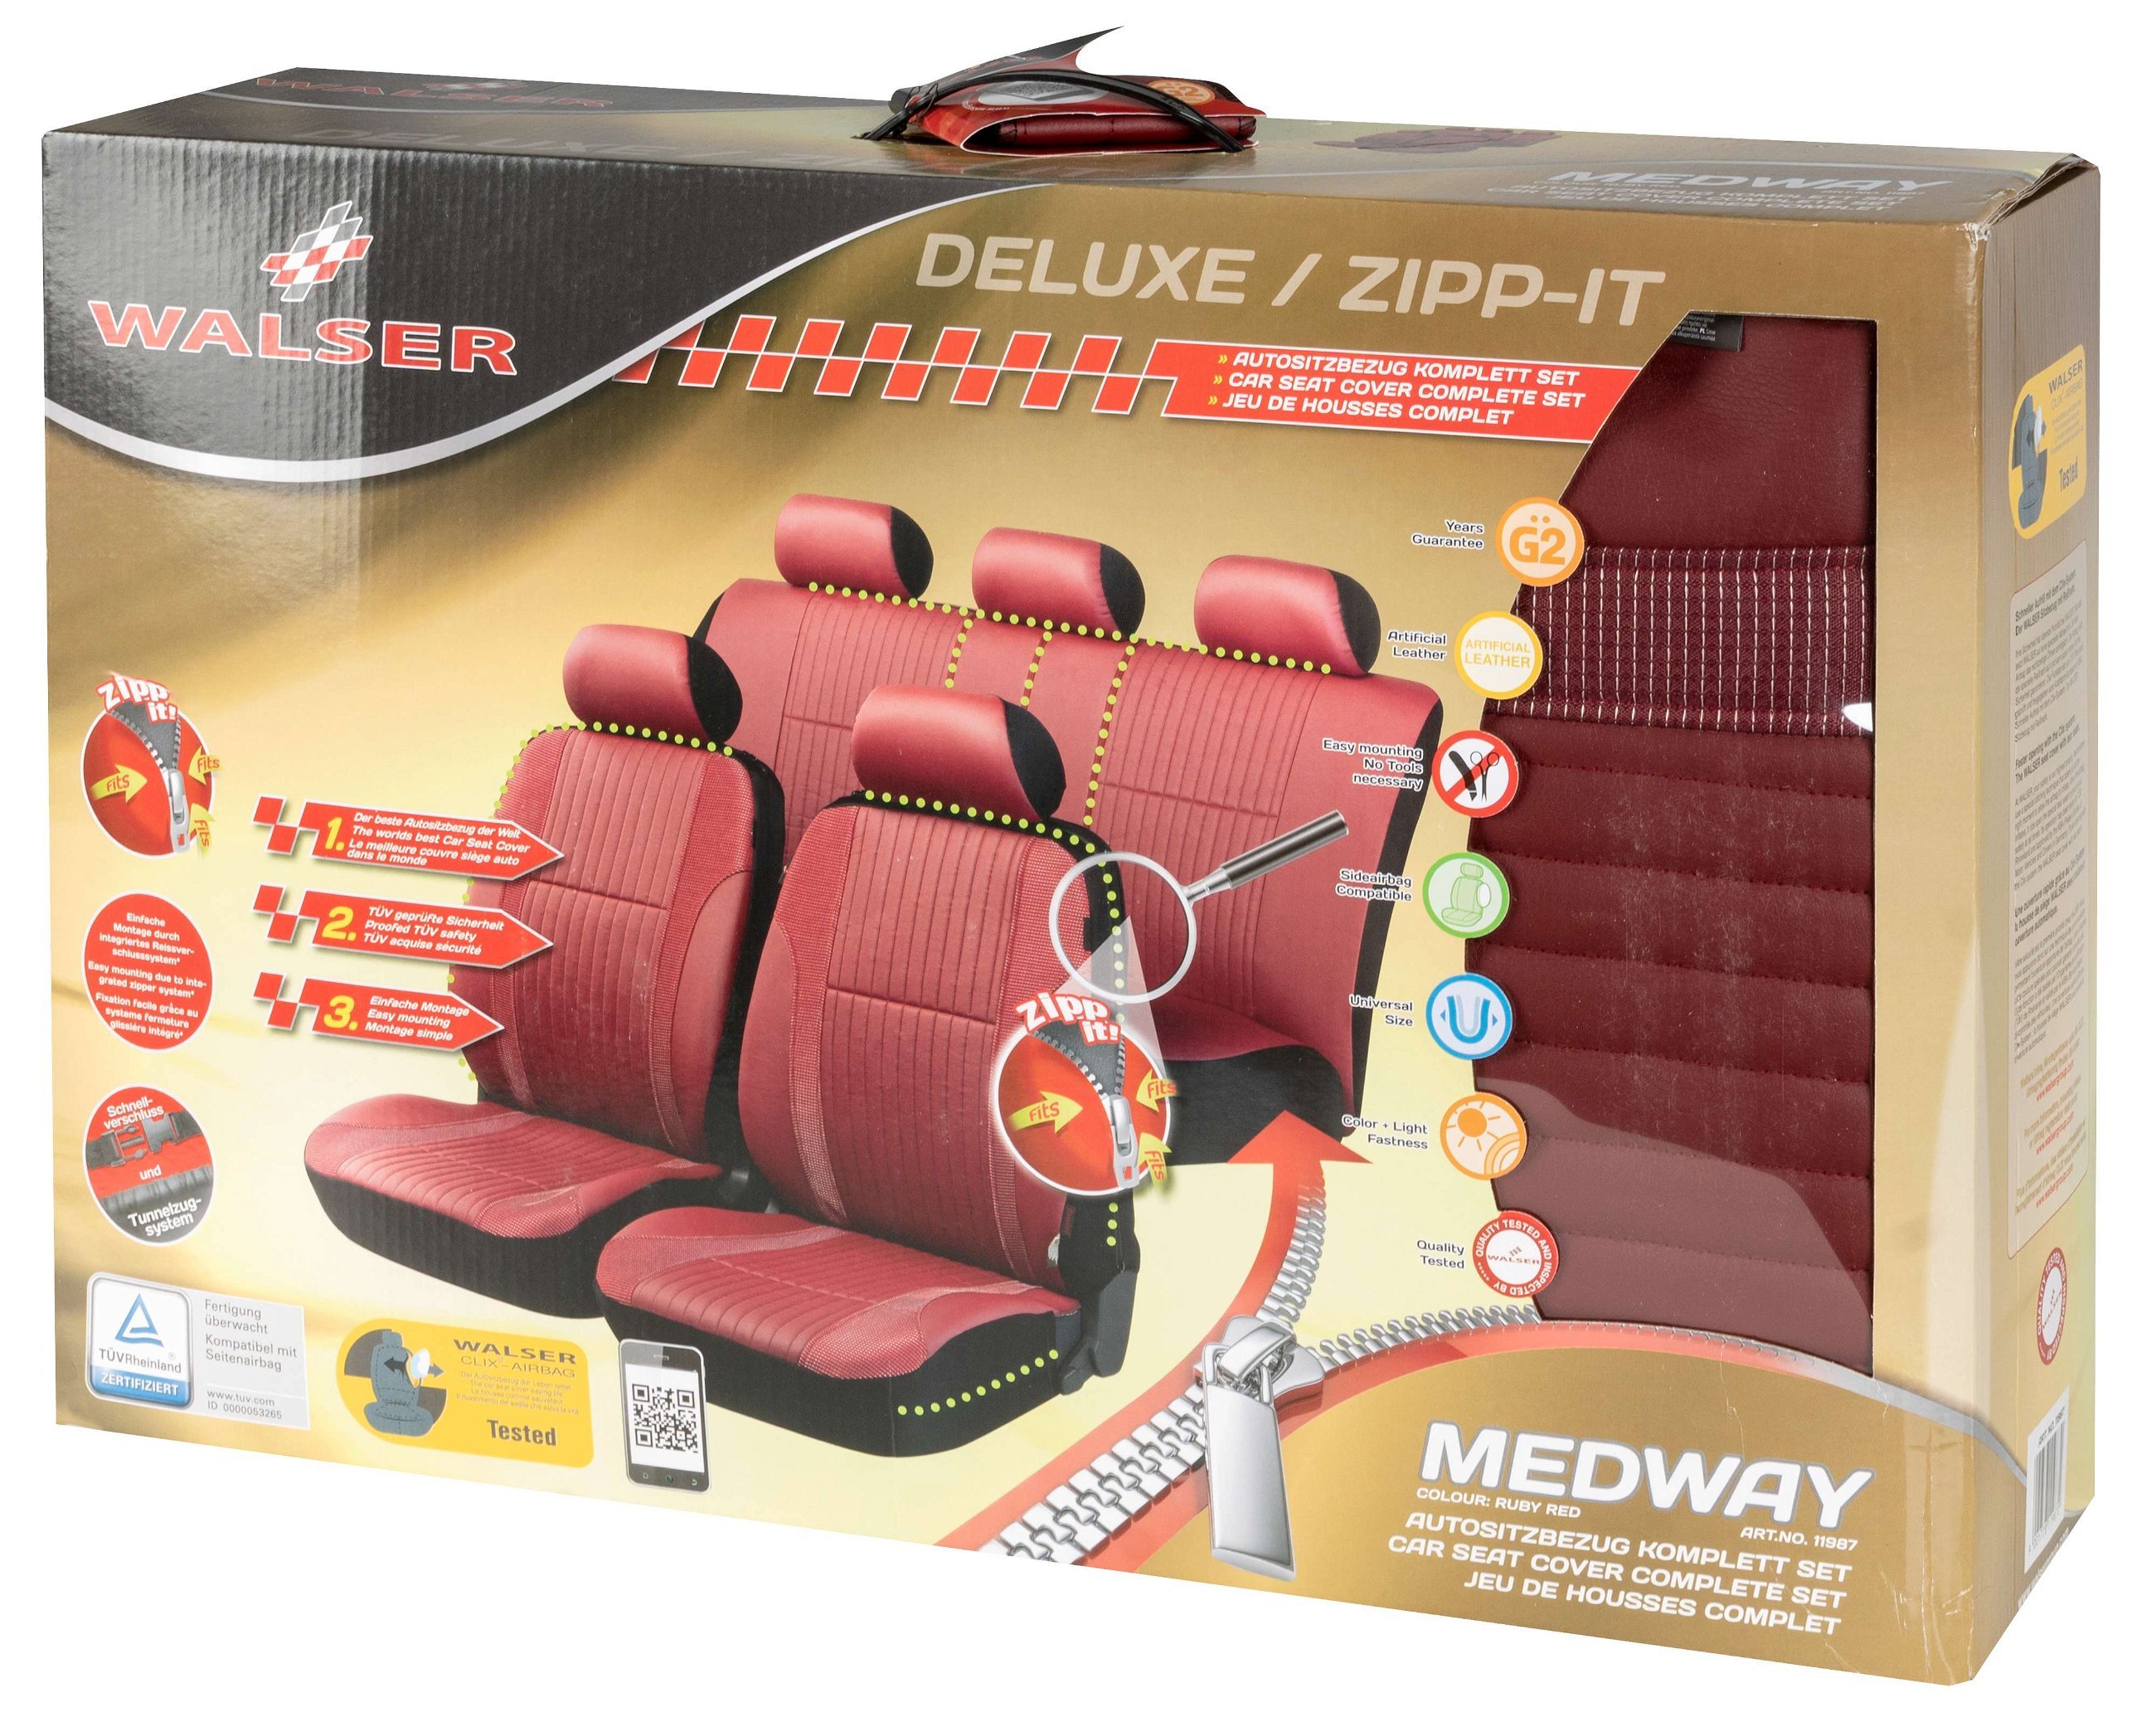 ZIPP IT Deluxe Medway car Seat covers in imitation leather with zipper system